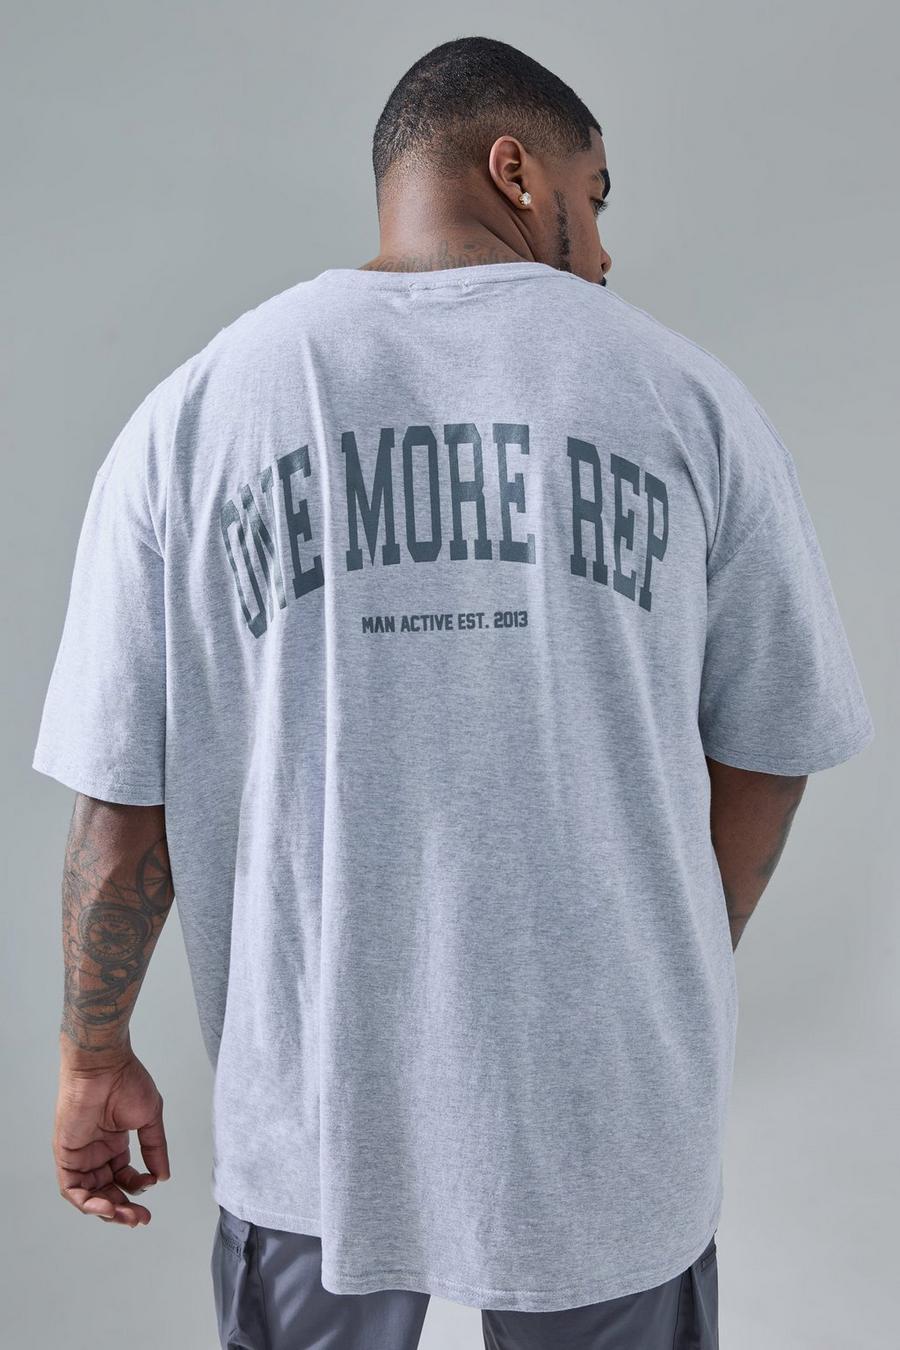 Grey marl Plus Man Active Oversized One More Rep T-shirt image number 1